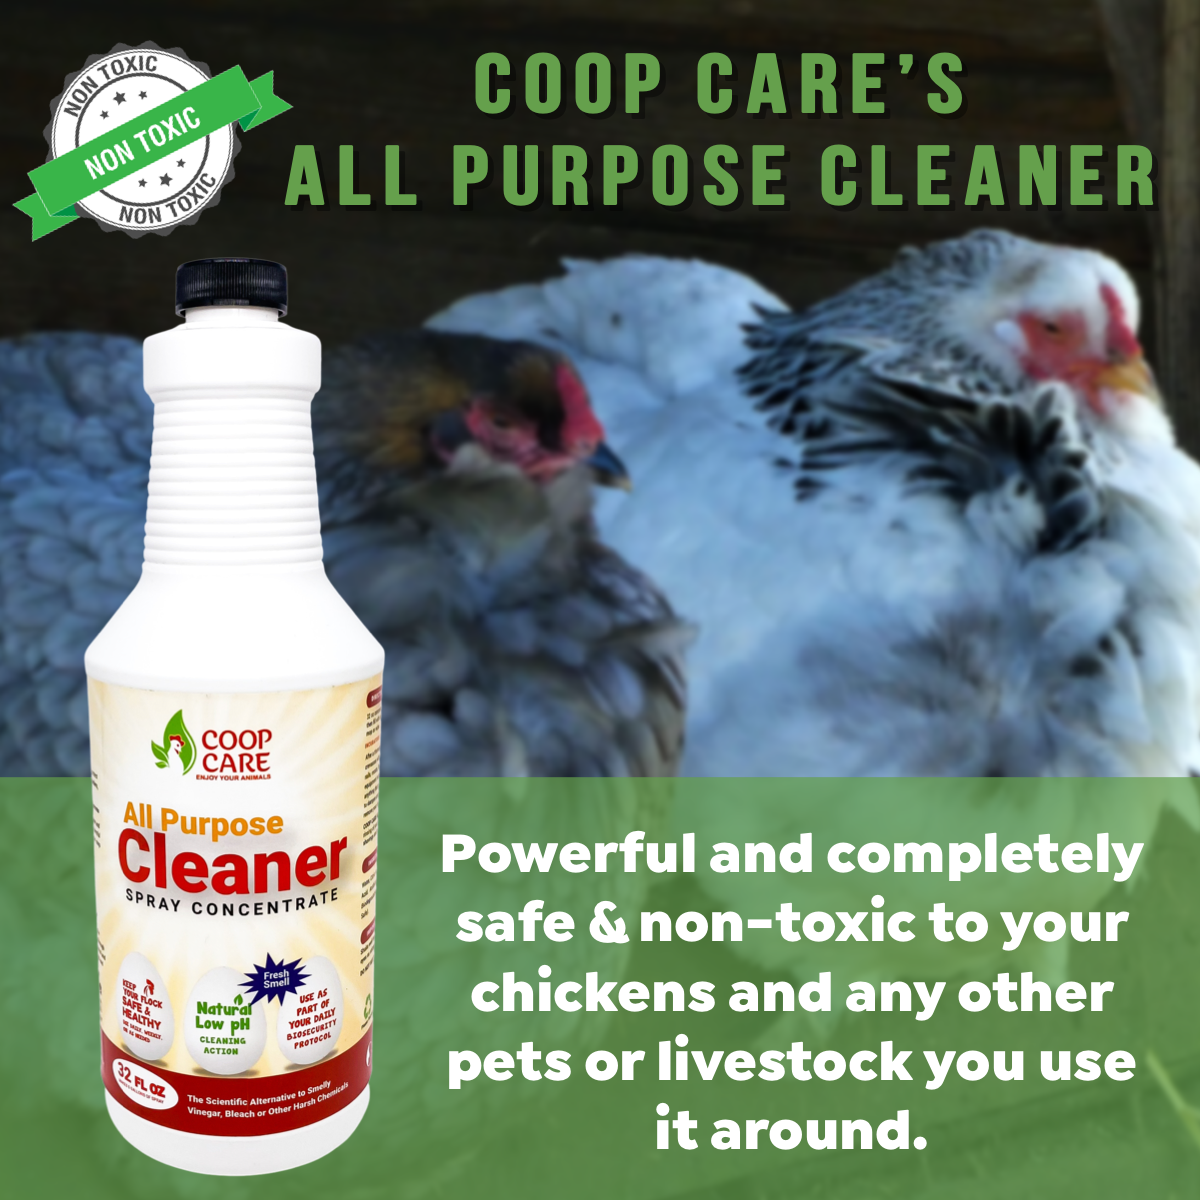 Coop Care All Purpose Cleaner - Wash away Viruses, Bacteria and Fungus (4 oz)